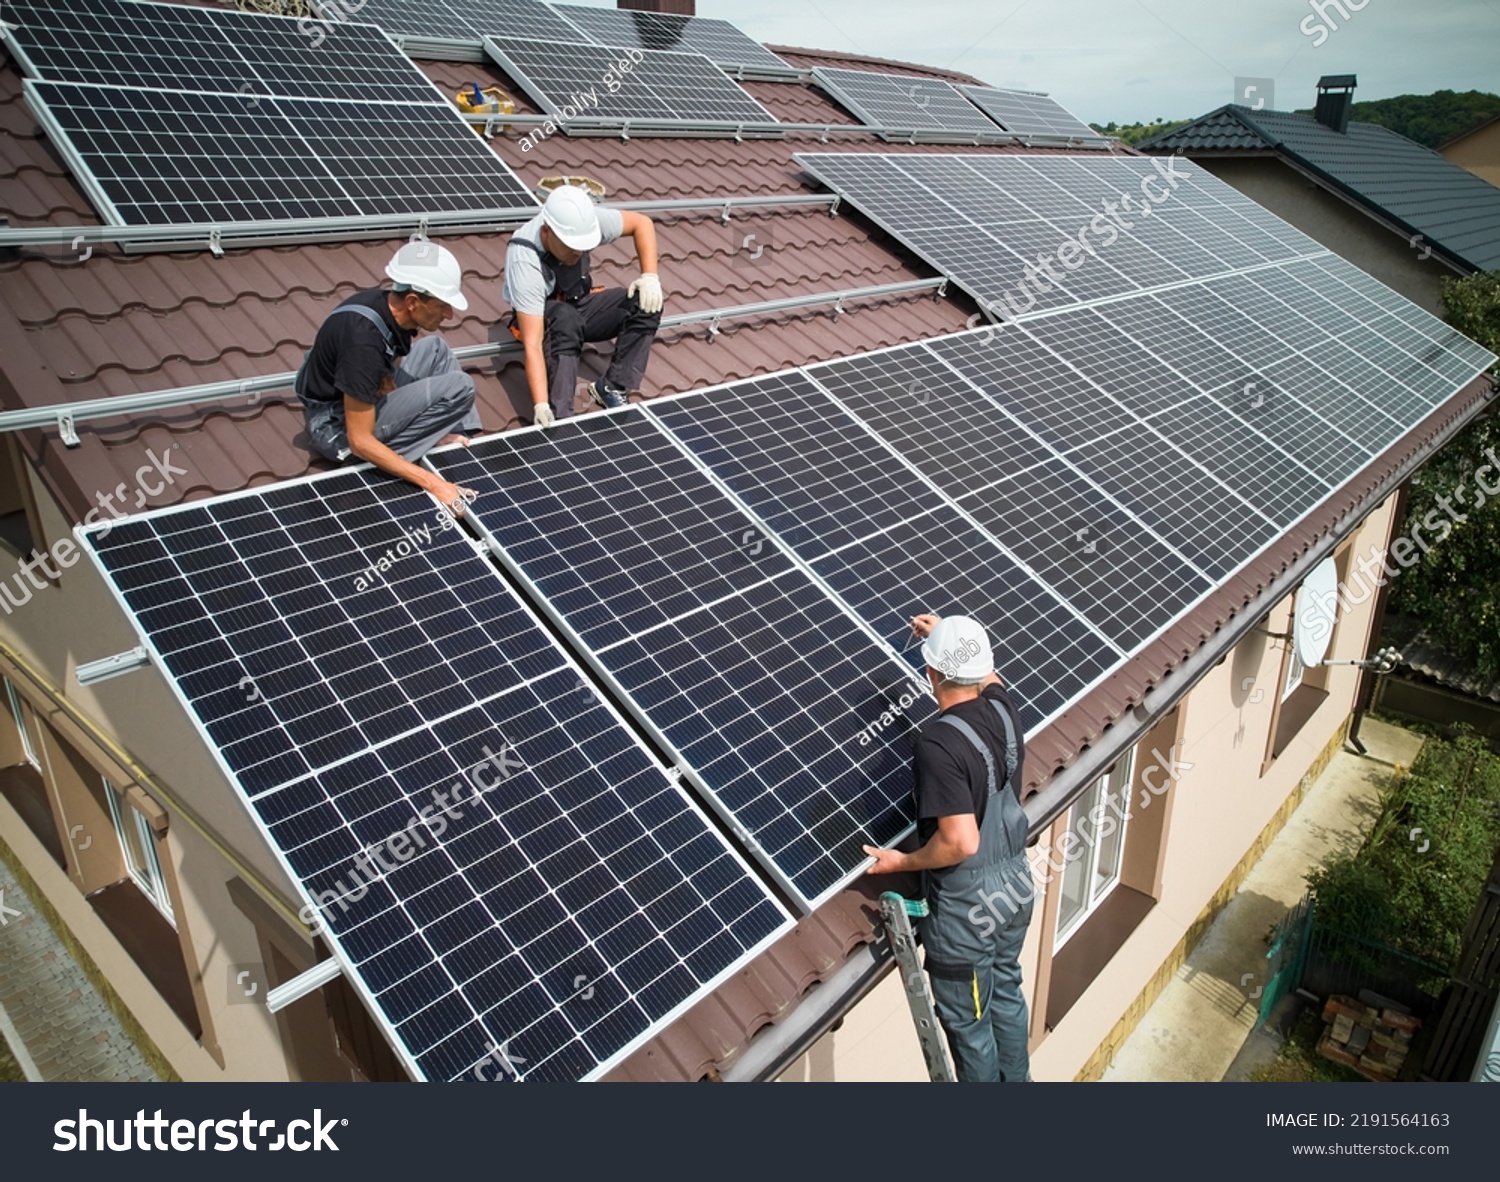 Men installers mounting photovoltaic solar moduls on roof of house. Engineers in helmets installing solar panel system outdoors. Concept of alternative and renewable energy. Aerial view. #2191564163